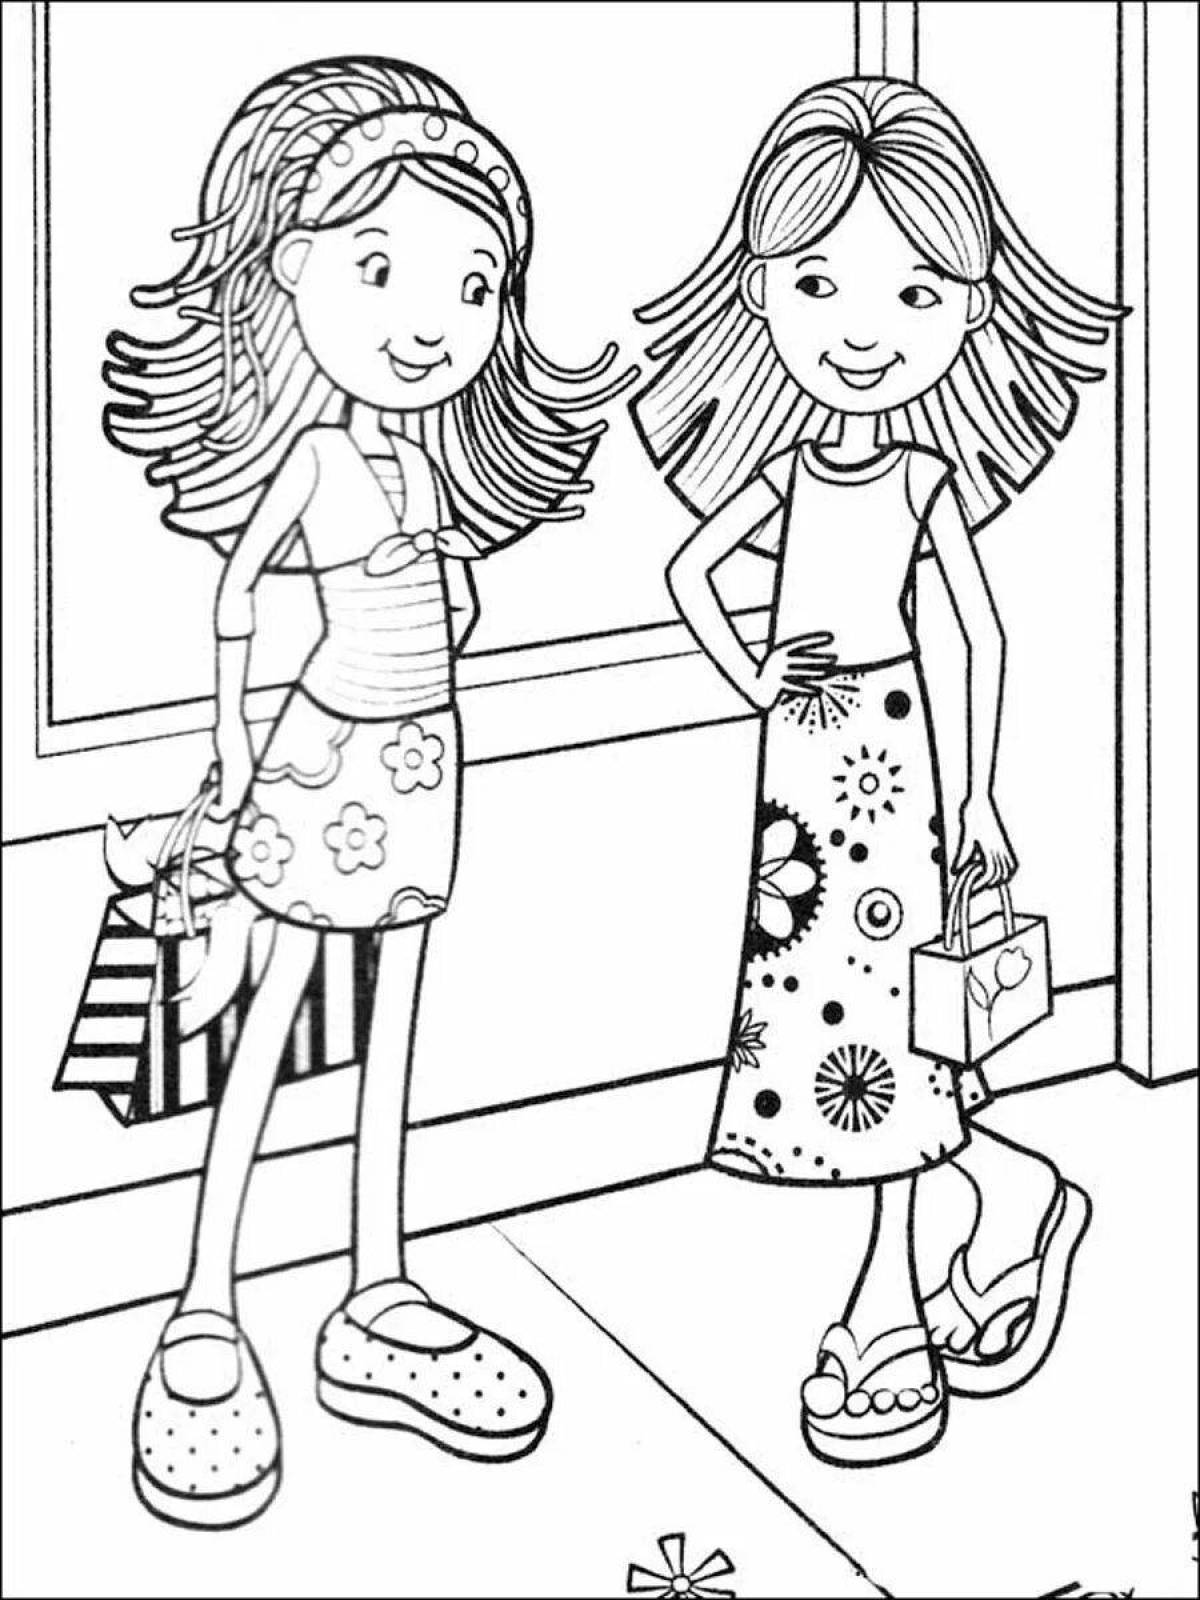 Three girlfriends horny coloring book